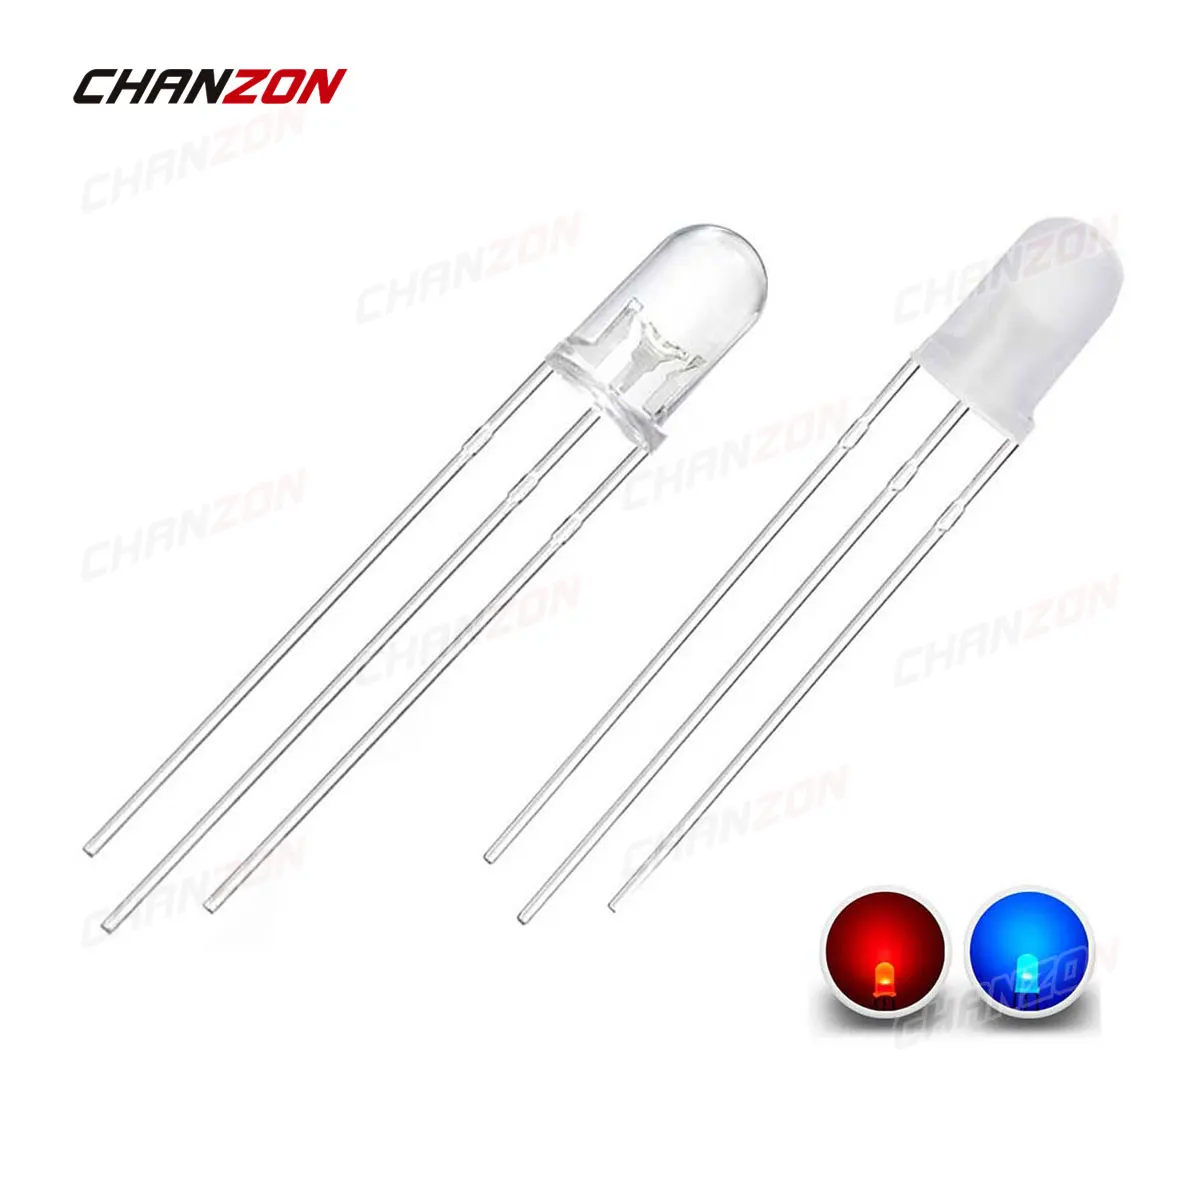 100pcs 5mm Red Blue Bicolor LED Diode Common Anode Cathode Round Lens DIY DIP 3V 3pin Dual Color Lamp 5 mm Light Emitting Diode